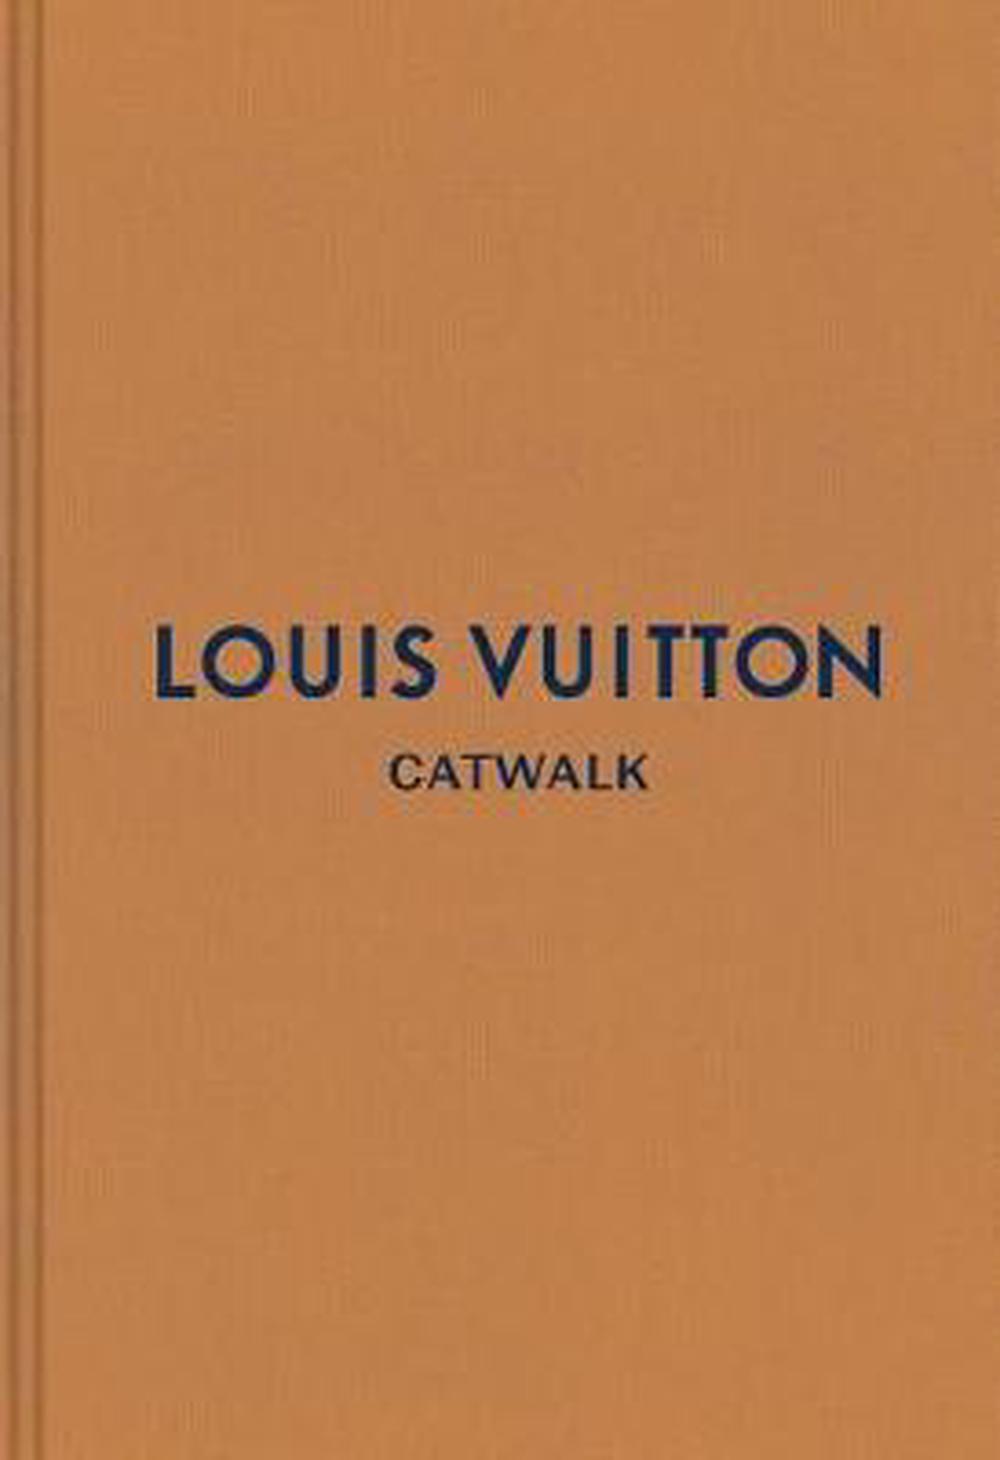 Louis Vuitton The Complete Fashion Collections Hardcover Book Free